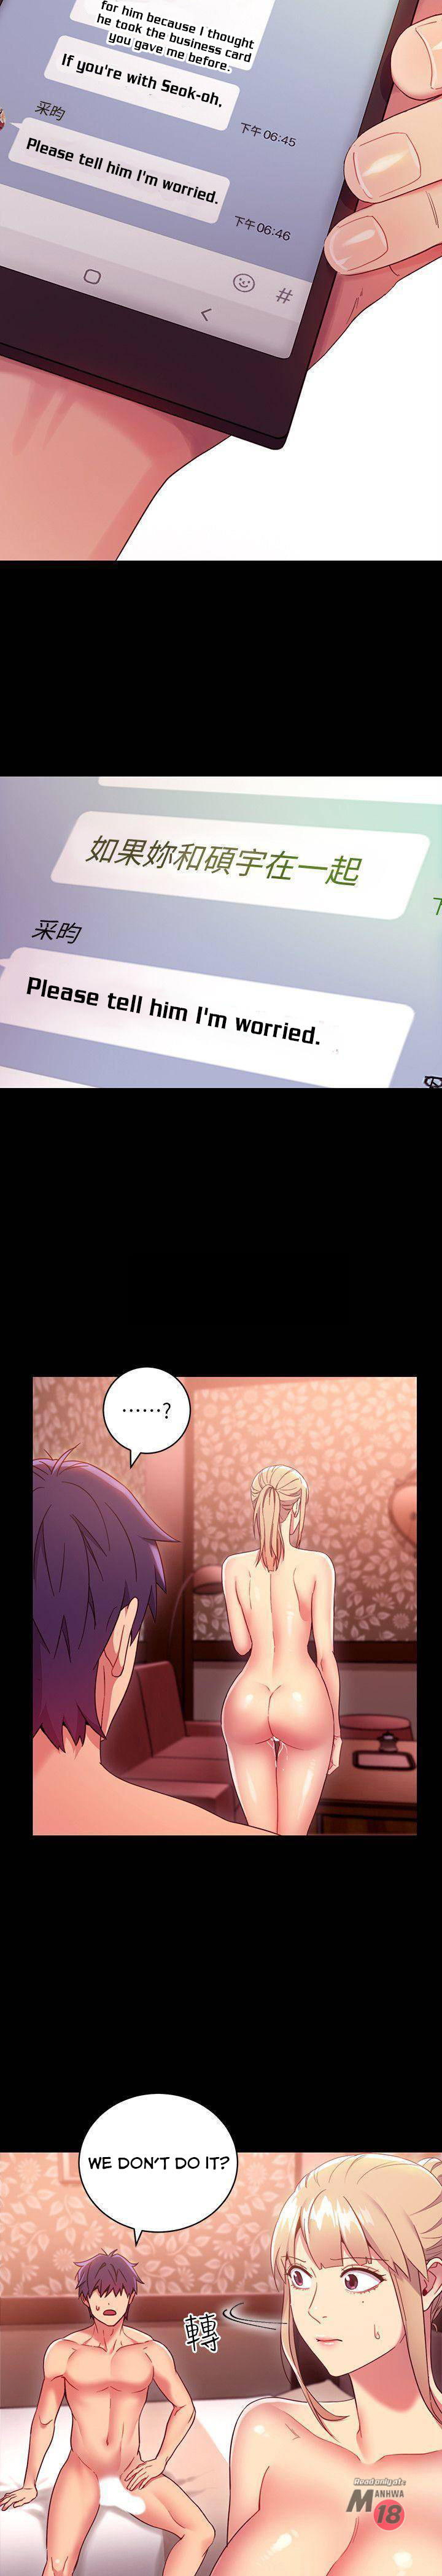 Panel Image 1 for chapter 12 of manhwa Stepmother